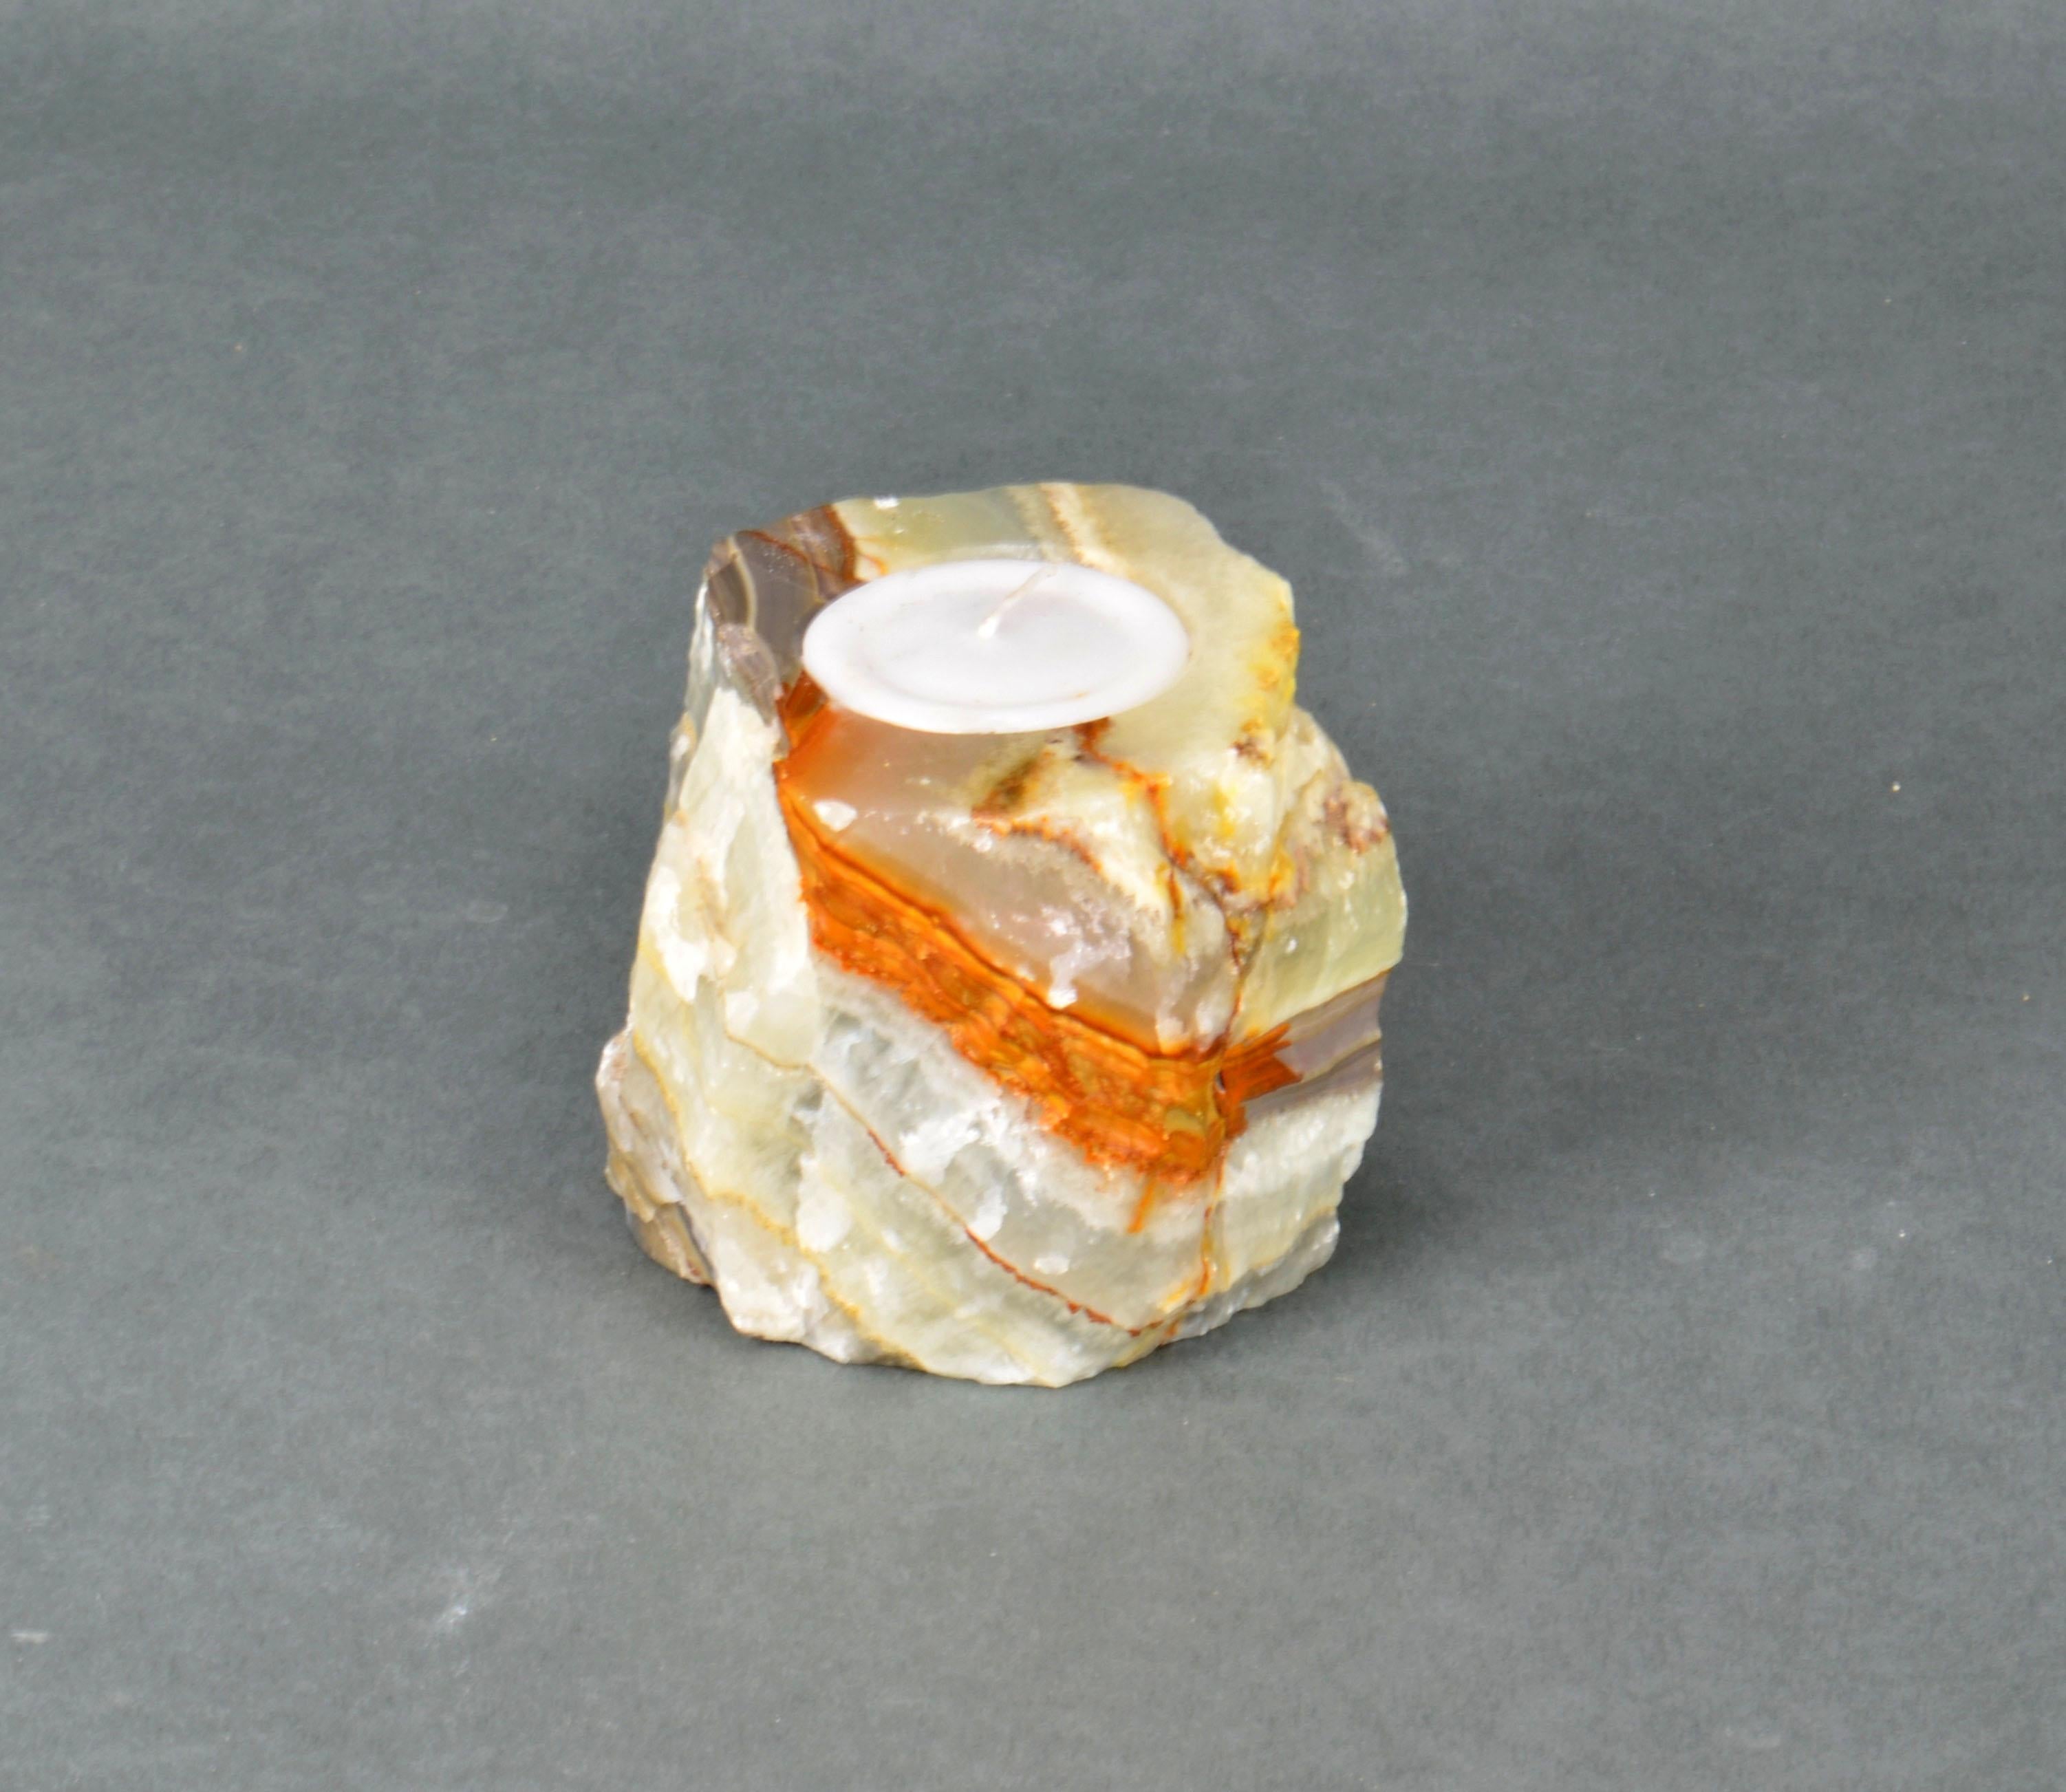 Modern Manually Carved Layered Onyx Candle Holder with Many Layers of Sediments